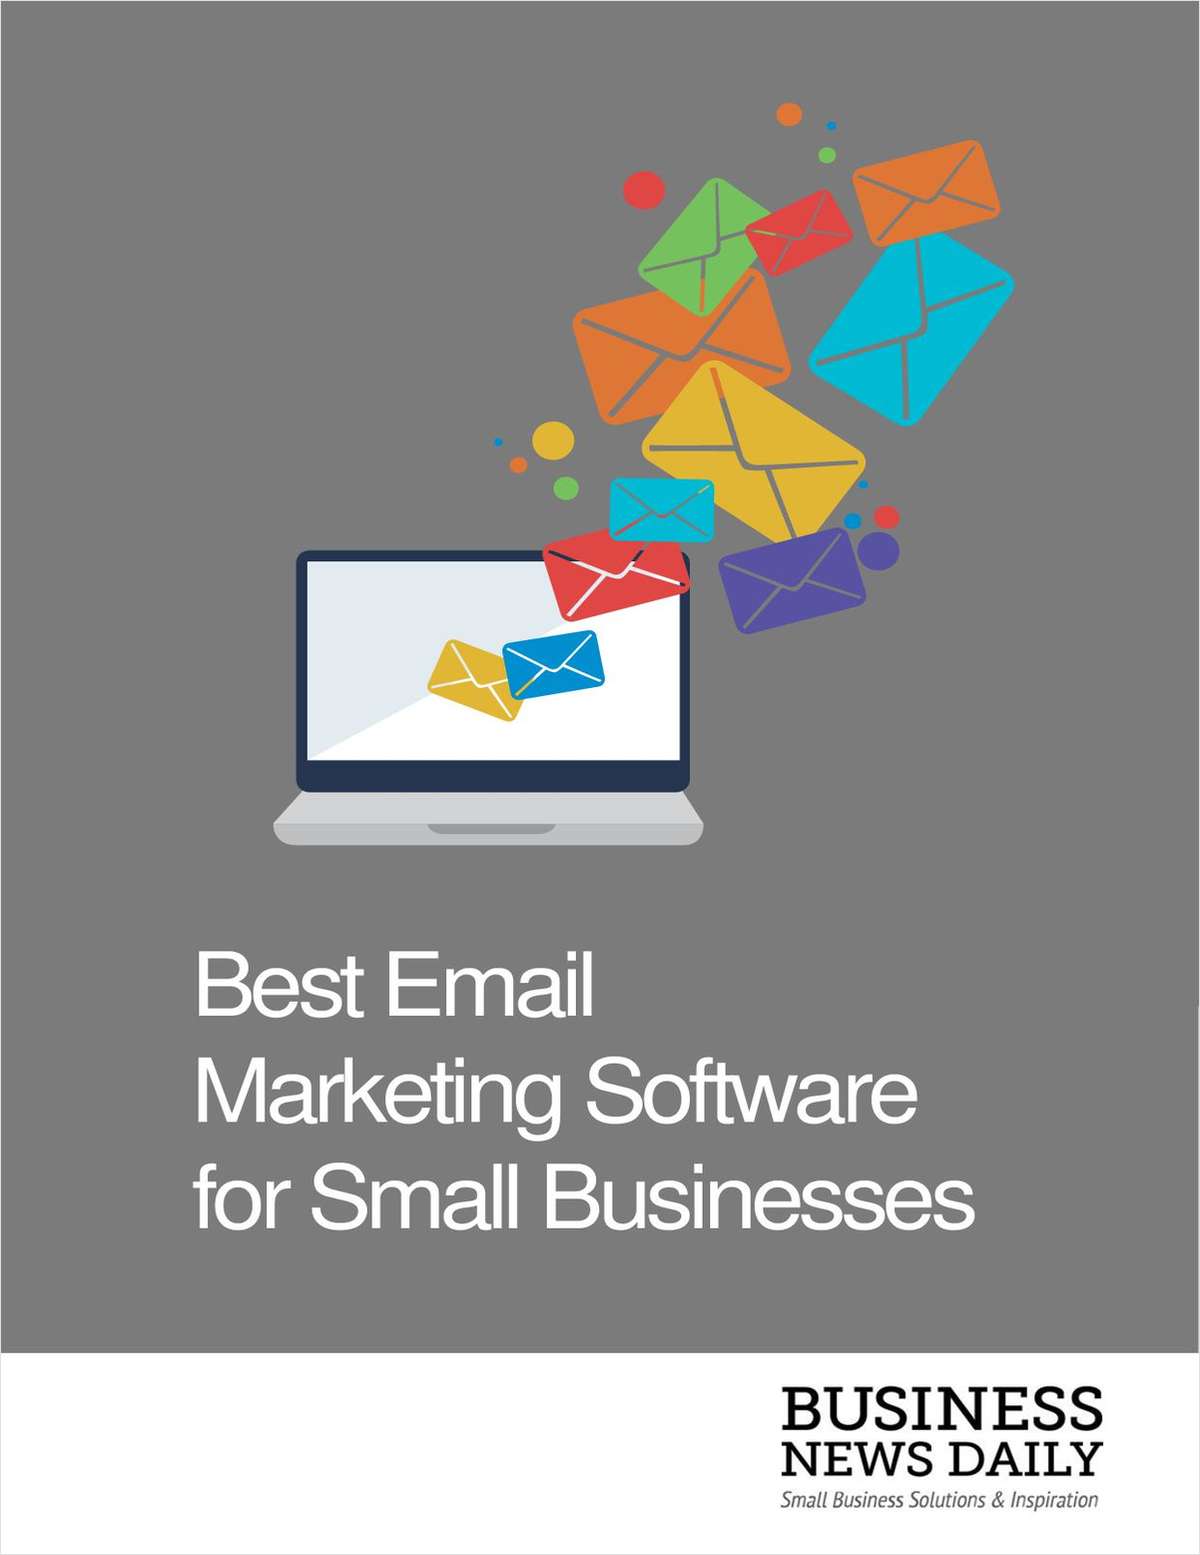 Best Email Marketing Software for Small Businesses Free Guide